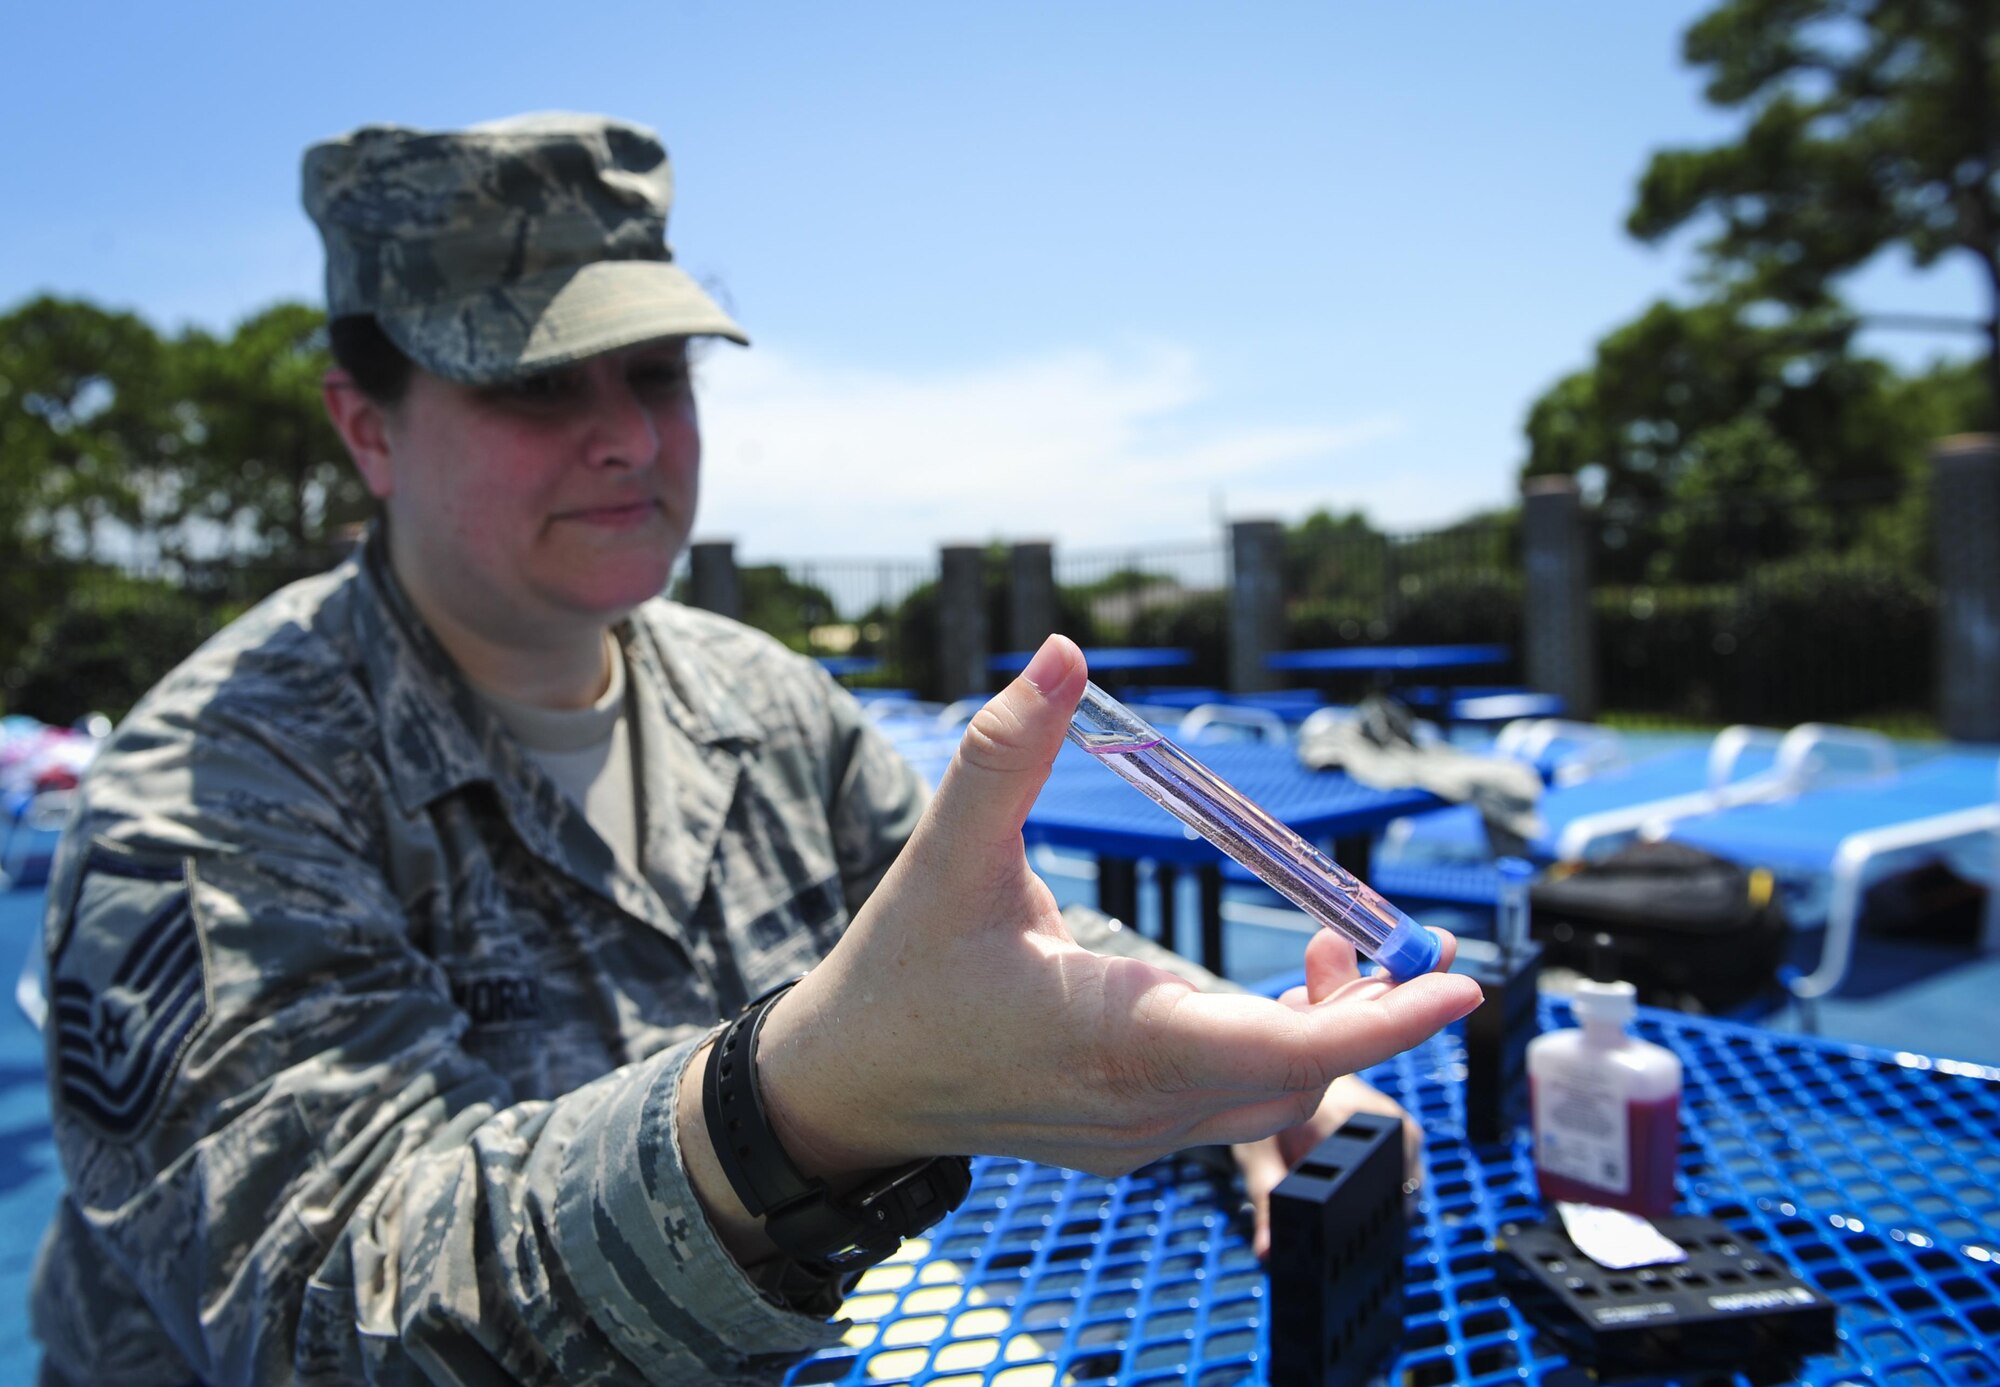 Master Sgt. Melissa Worley, 1st Special Operations Support Squadron independent duty medical technician, mixes phenol dye with pool water to test for pH and chlorine levels at the Aquatic Center on Hurlburt Field, Fla., July 22, 2015. Worley and other IDMTs train with bioenvironmental to ensure proficiency when testing water conditions. (U.S. Air Force photo/Senior Airman Meagan Schutter)